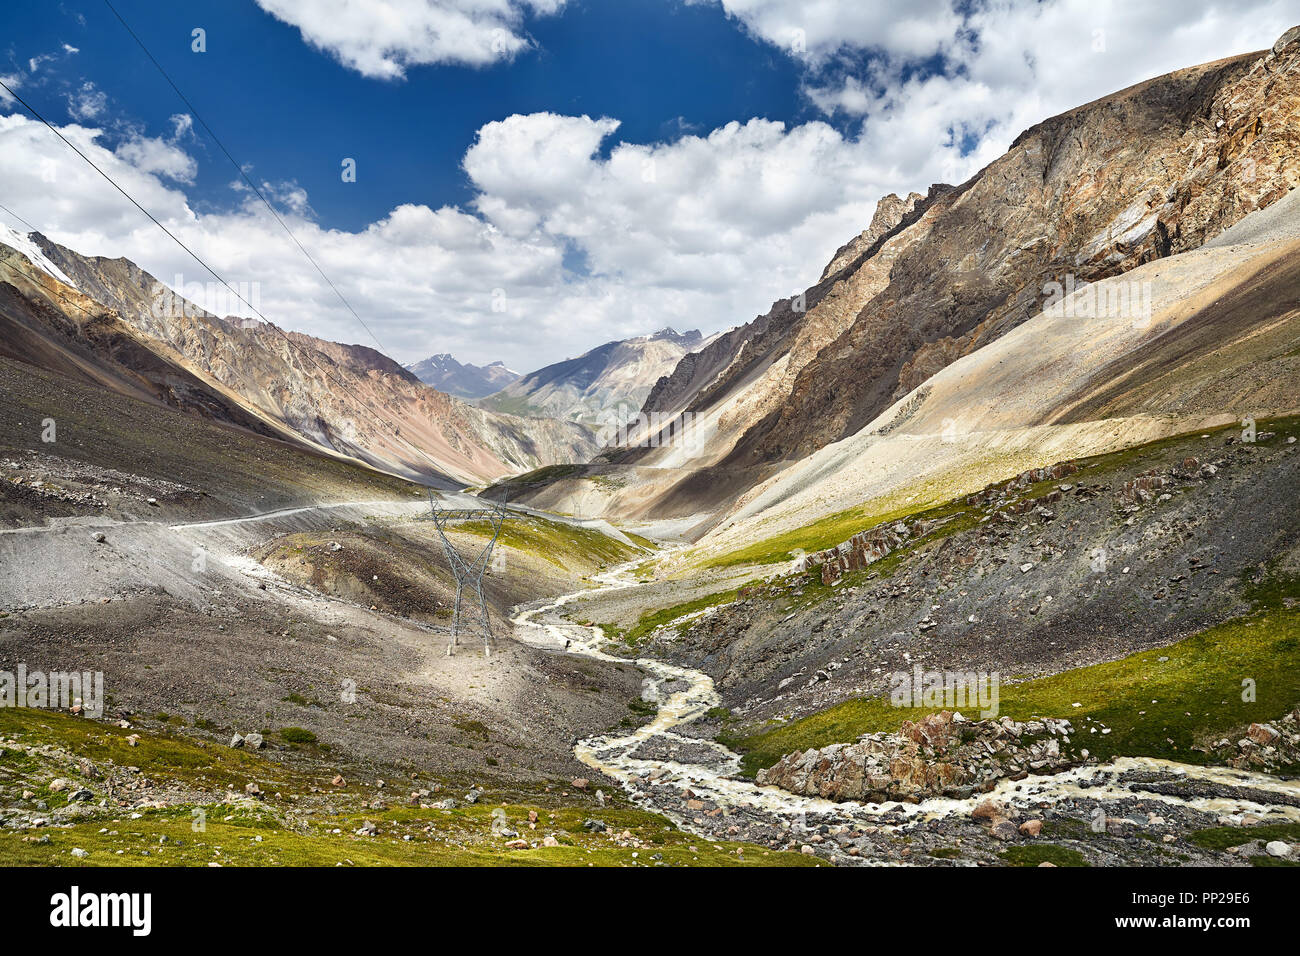 Road and white water river in the mountain valley at blue cloudy sky in Kyrgyzstan Stock Photo